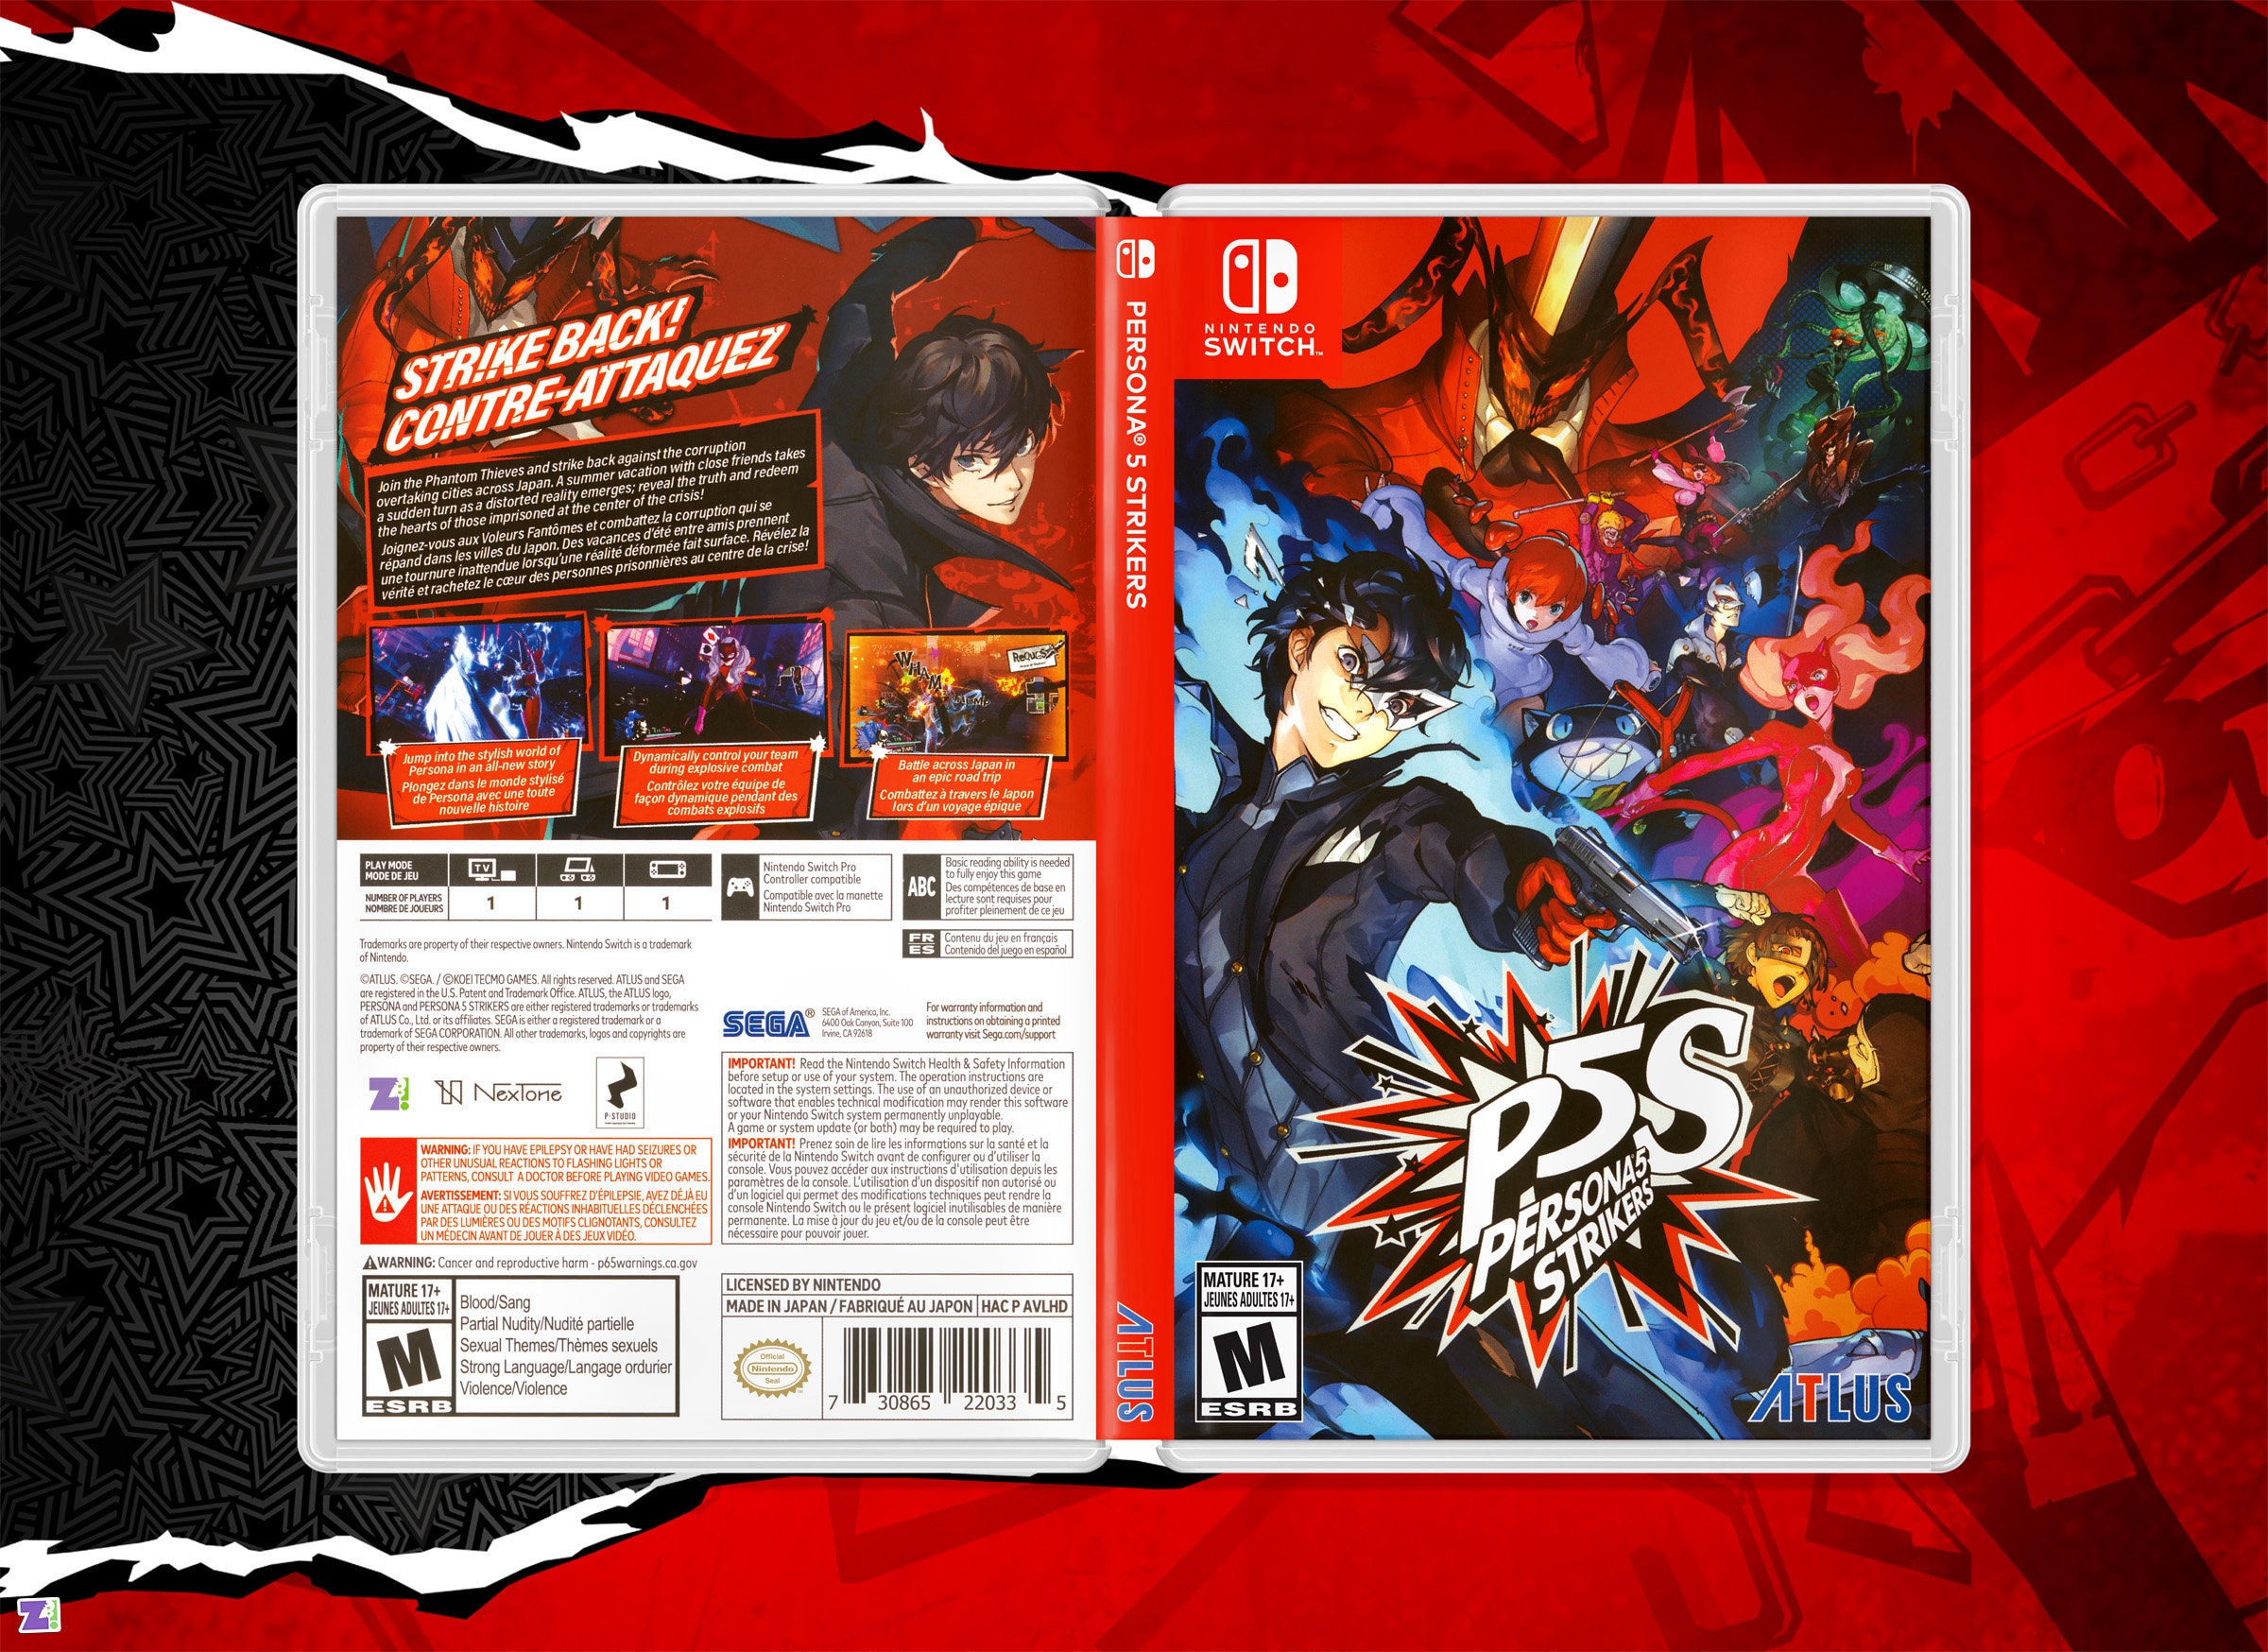 Persona 5 Strikers for Nintendo Switch, PS4 now available in PH